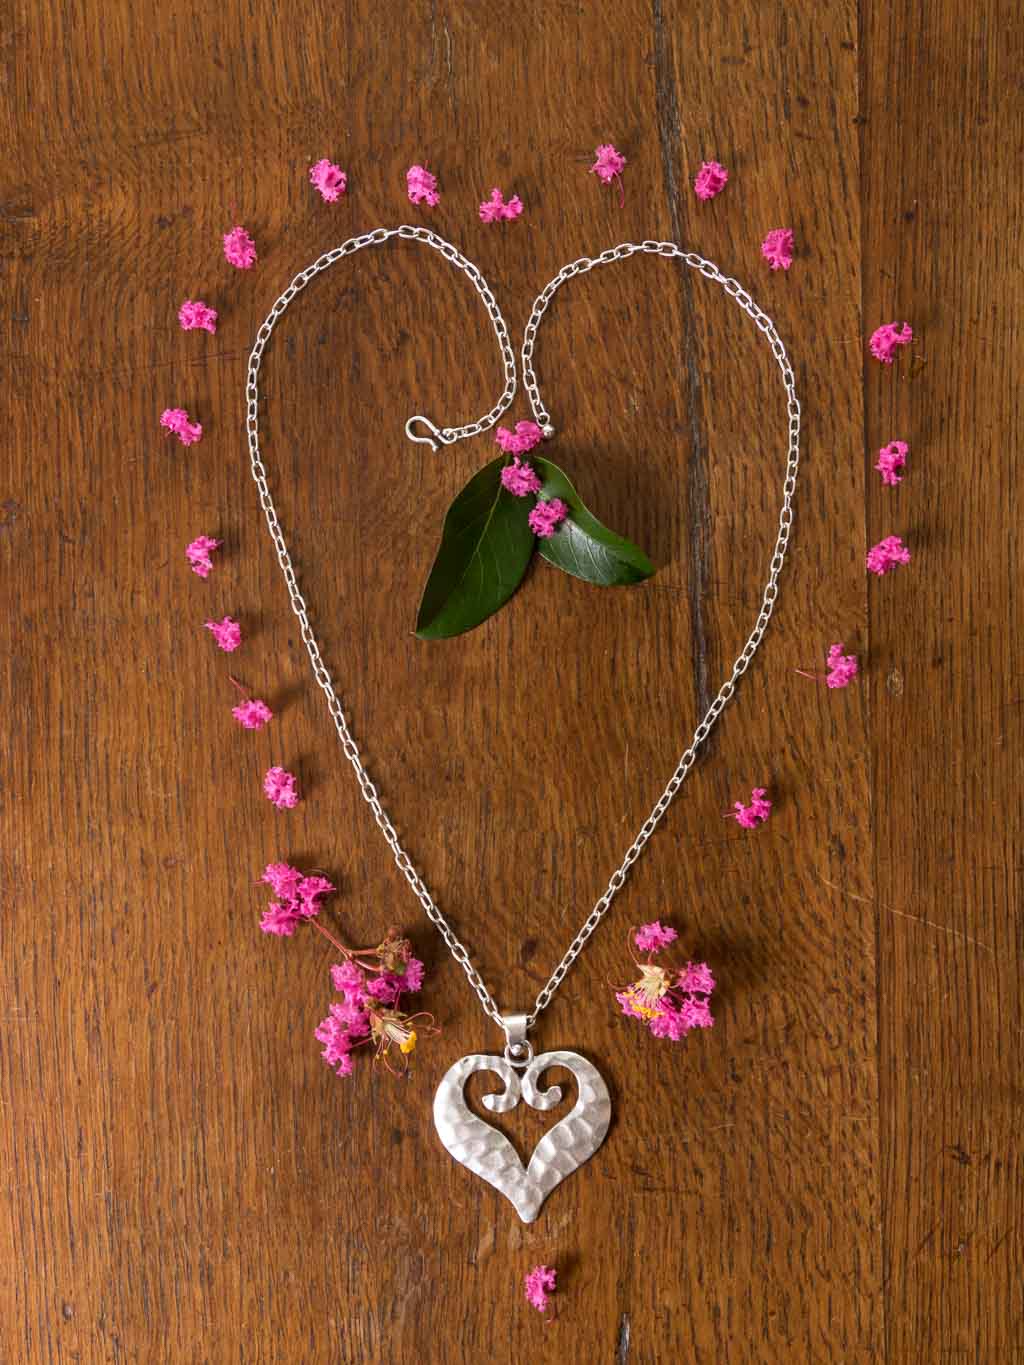 Love Me Necklace - a long chain with abstract heart medallion